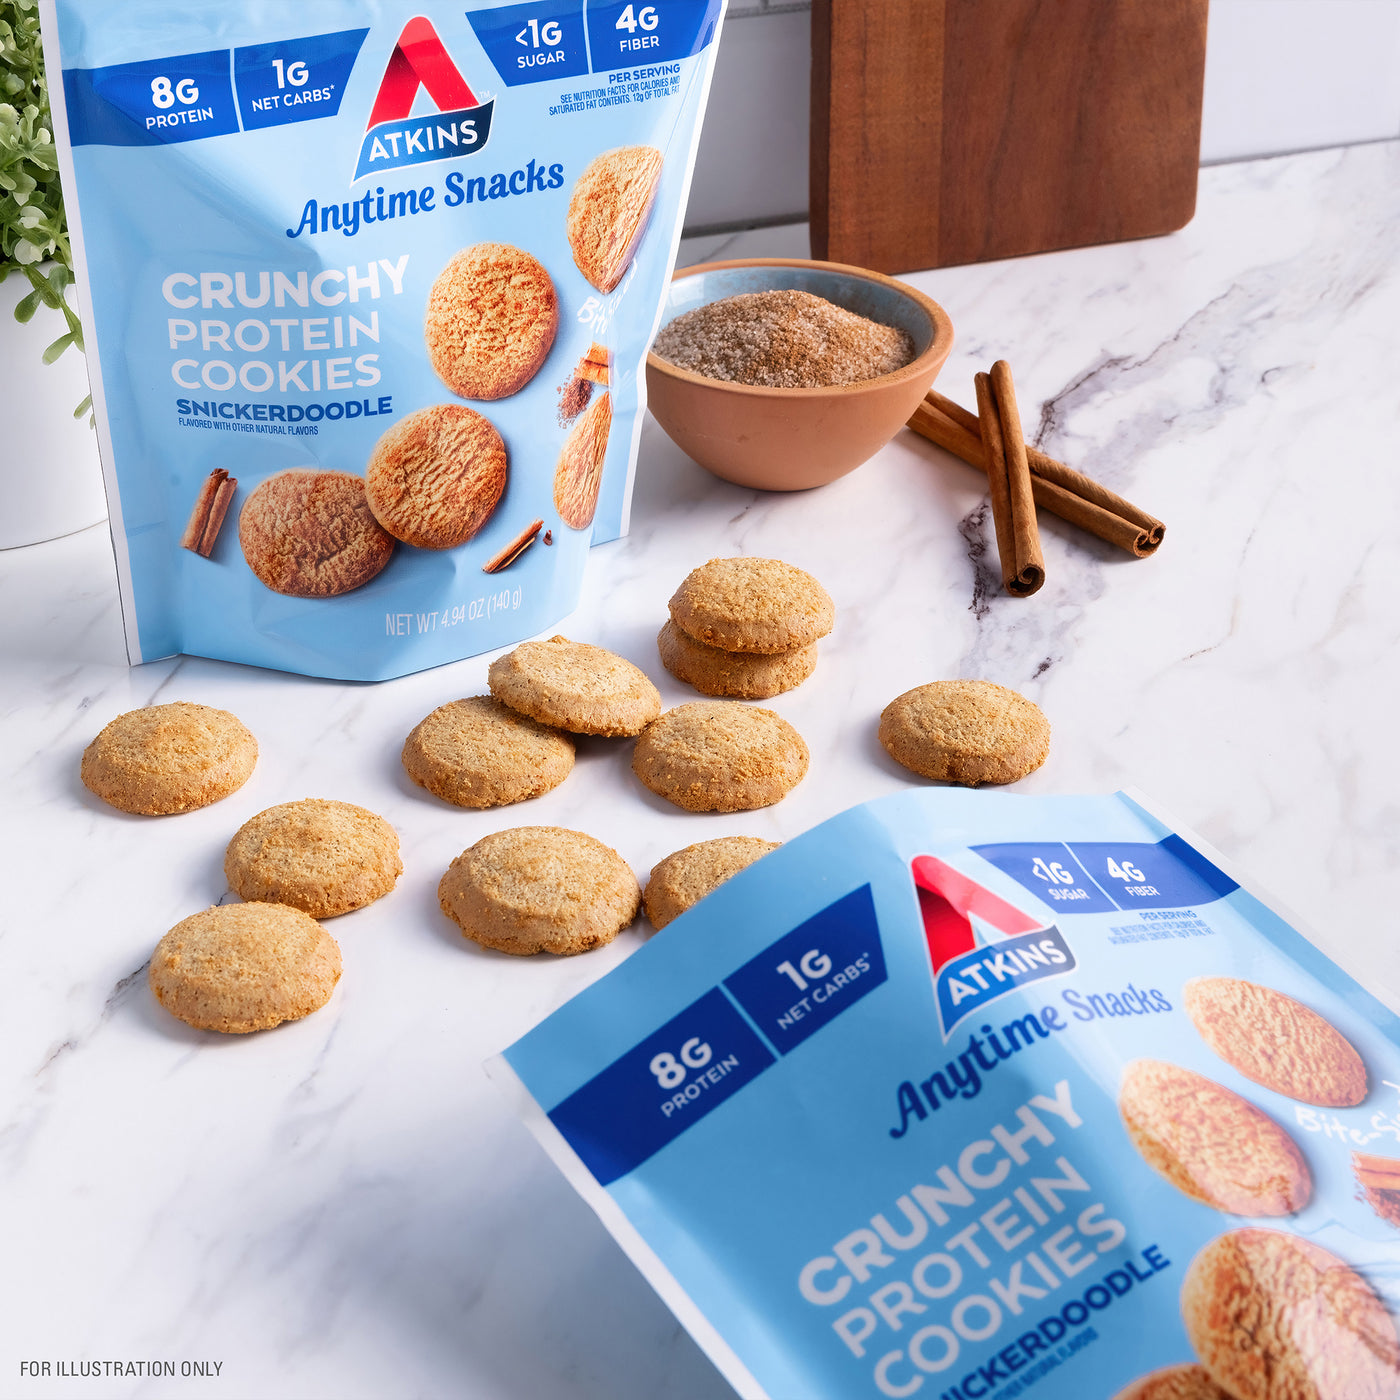 Snickerdoodle Bite-Sized Crunchy Protein Cookies with cookies on the marble table, bowl of cinnamon sugar and blue cloth next to it.